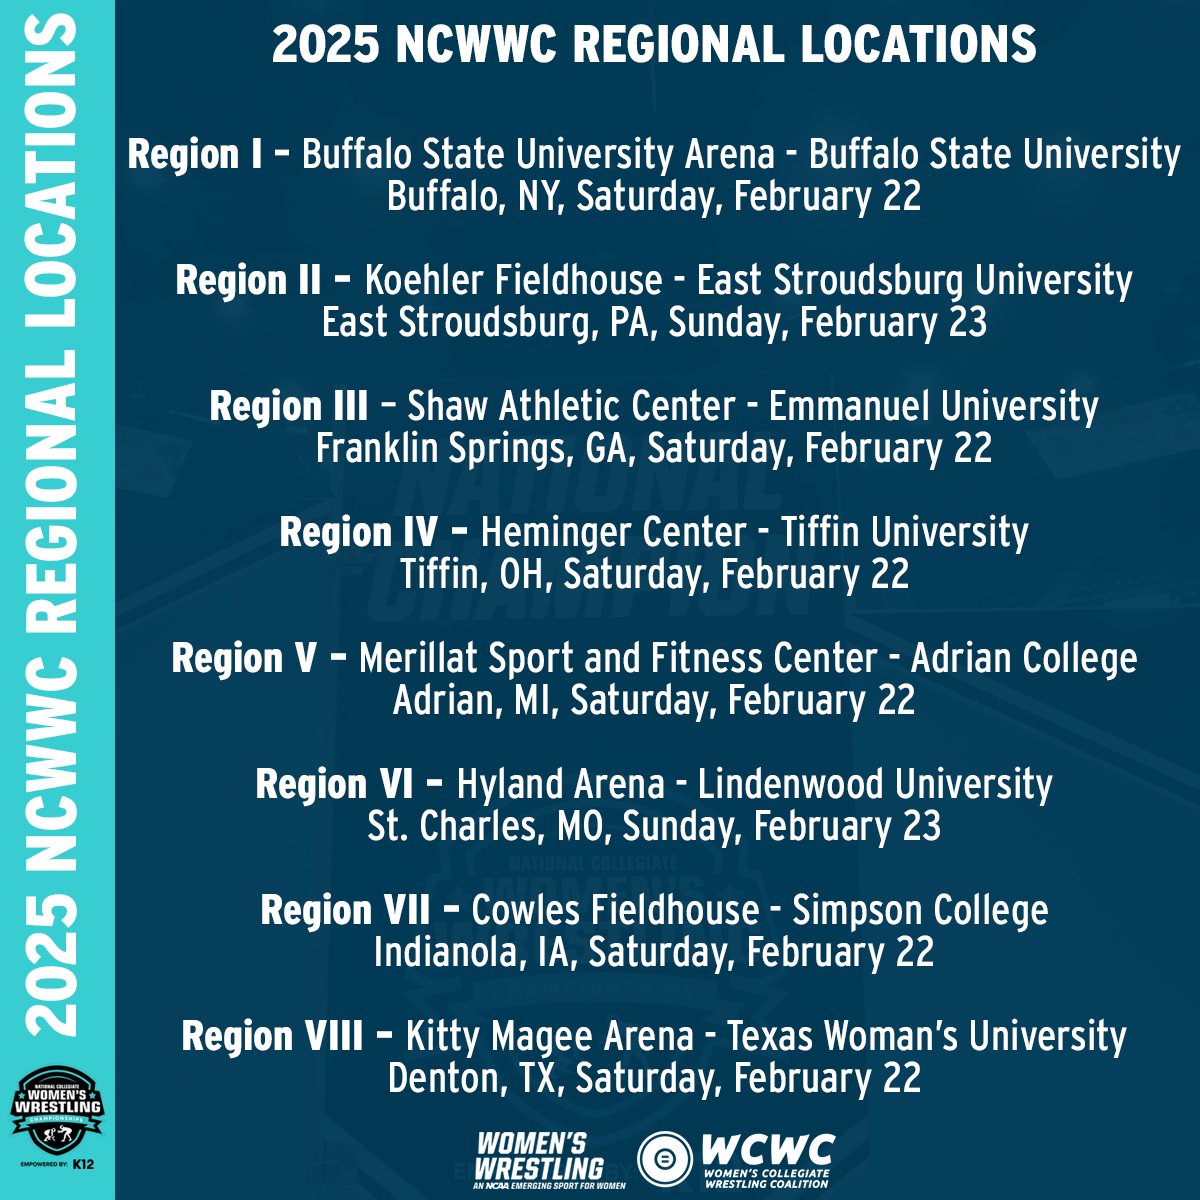 Sites and dates set for eight 2025 NCWWC Regionals, qualifiers for the national championship for NCAA women wrestlers 📰 bit.ly/4545xvz